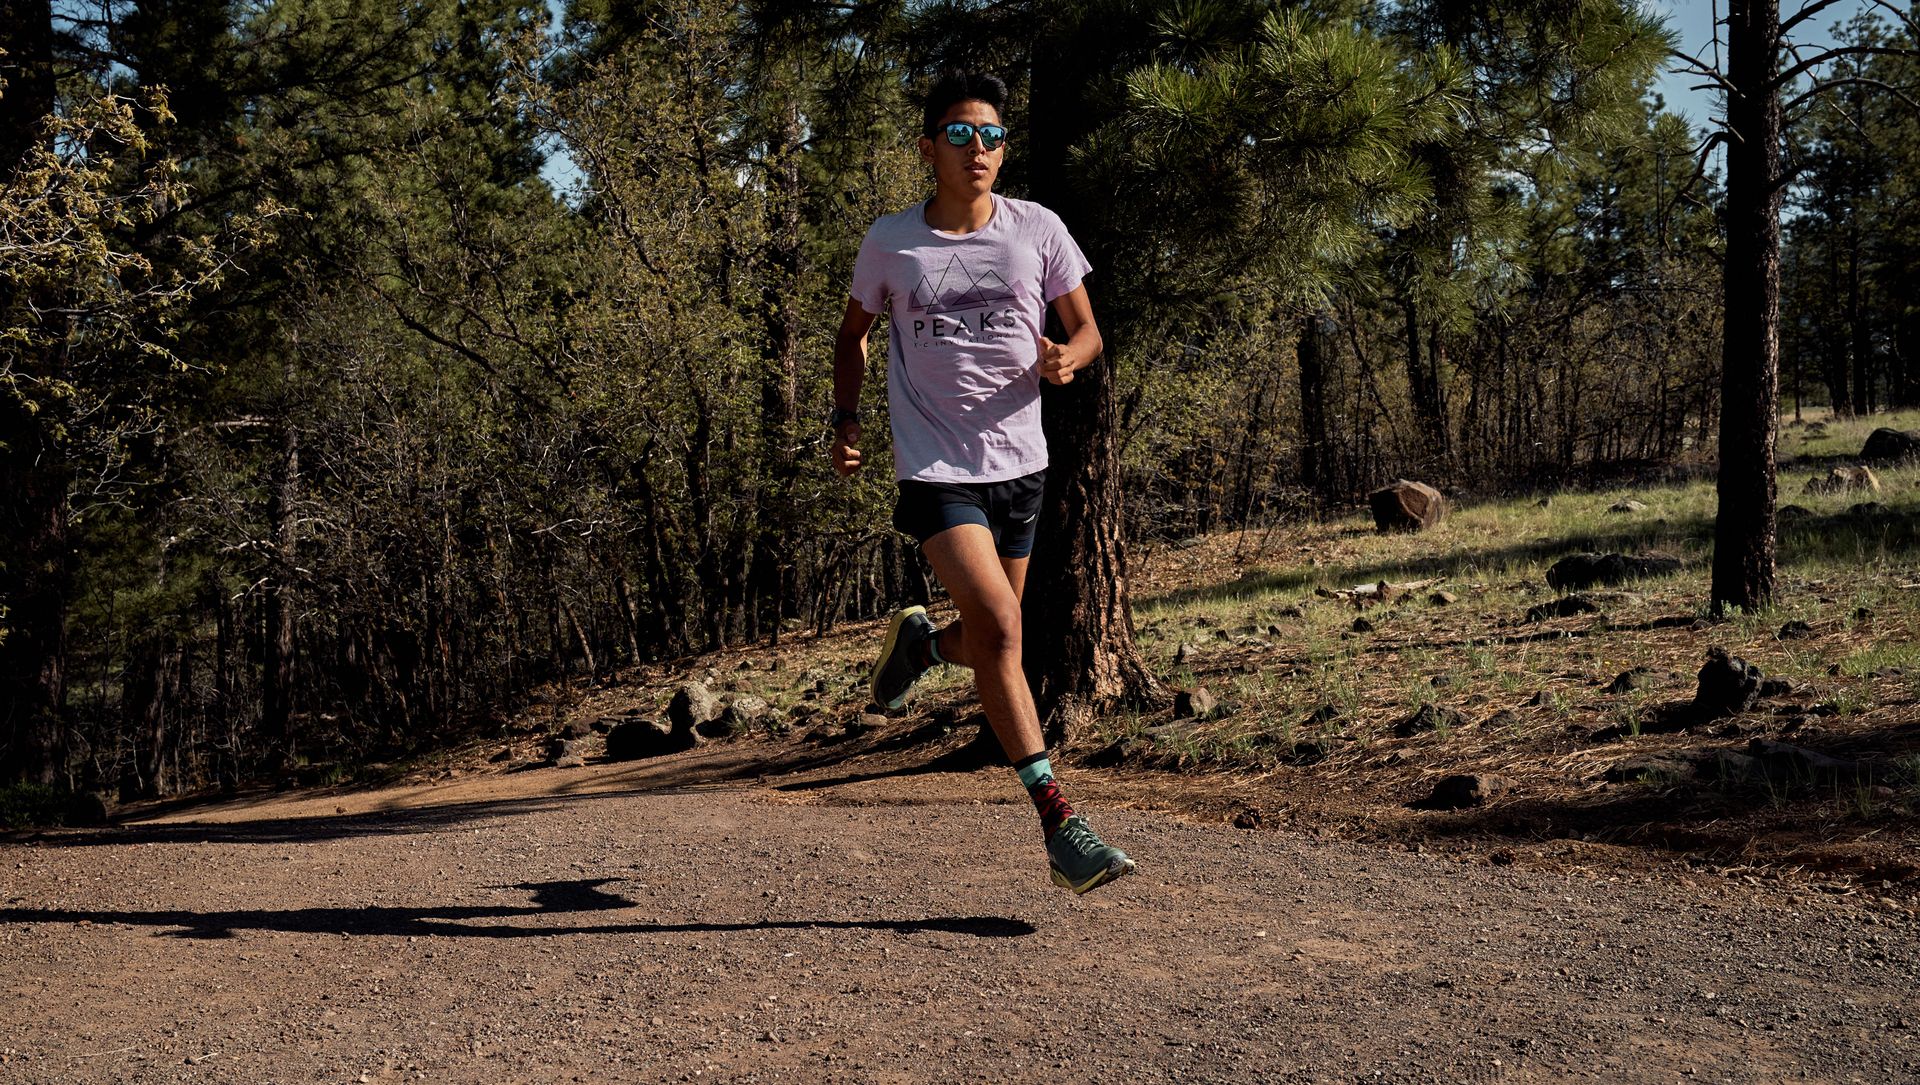 solo runner on a trail in arizona in the sunshine in 2019